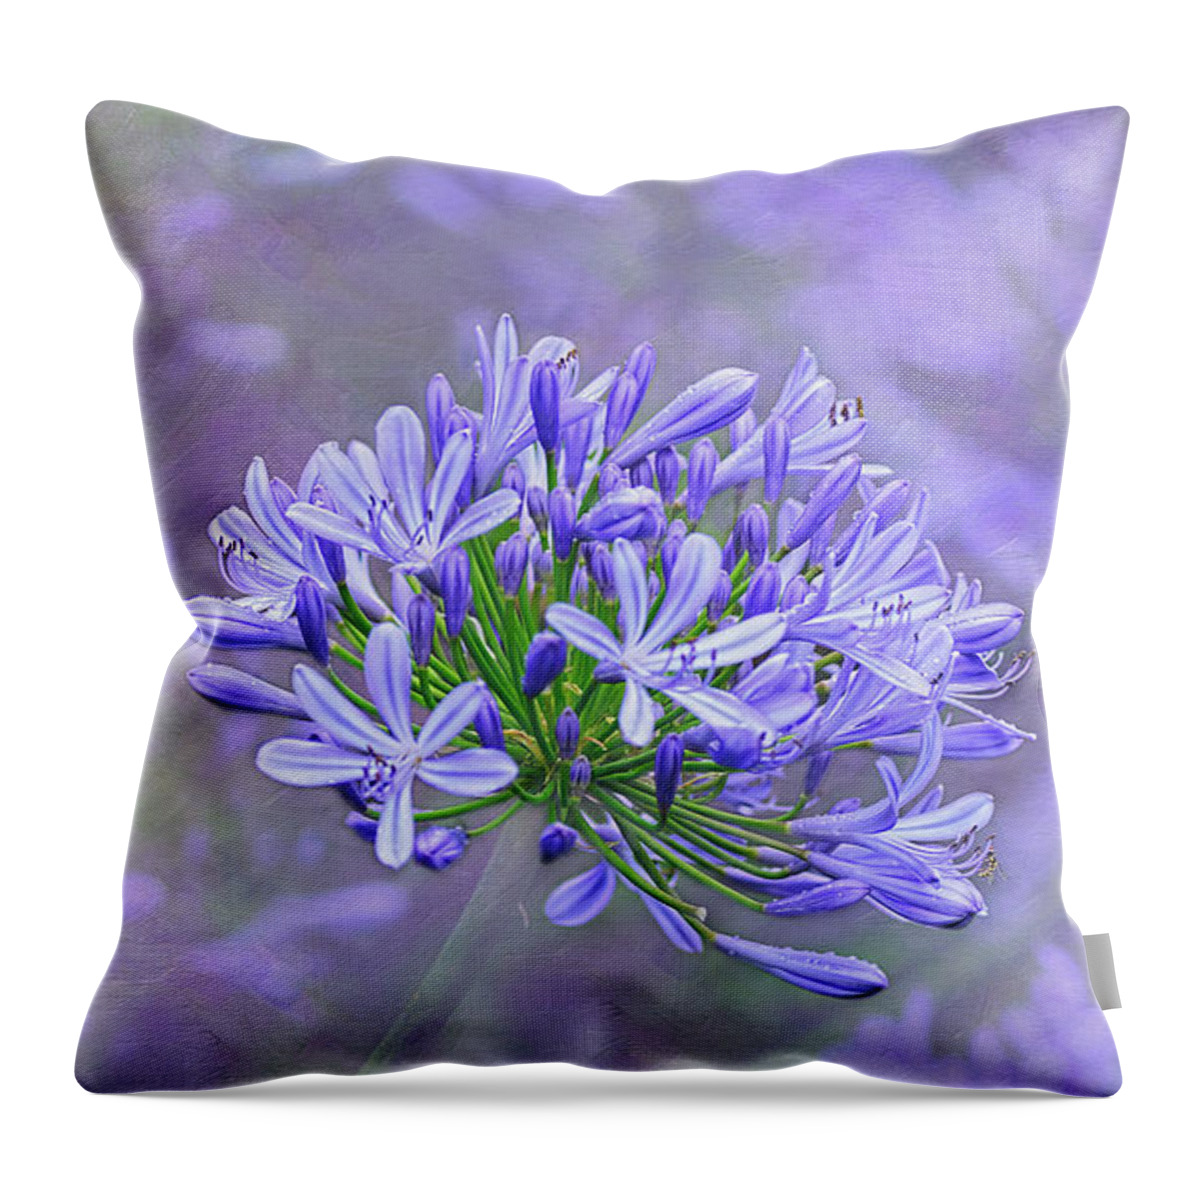 Photography Throw Pillow featuring the photograph Agapantha Lilac Pastel by Kaye Menner by Kaye Menner